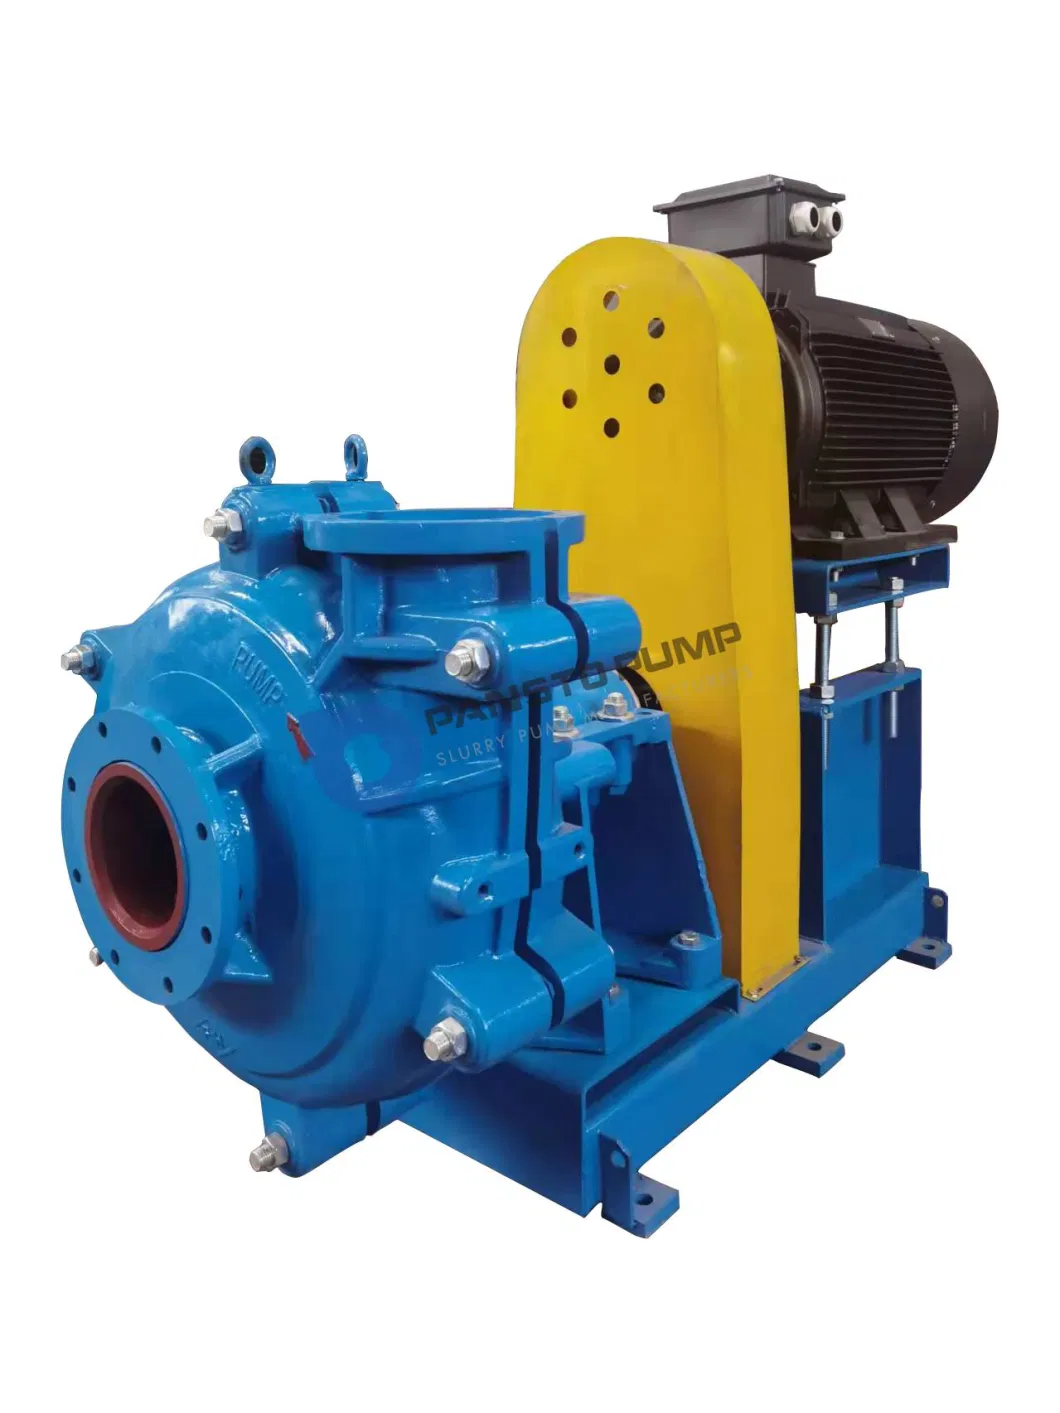 Efficient Dredging with High-Performance Ground Pumps and Slurry Pumping Equipment